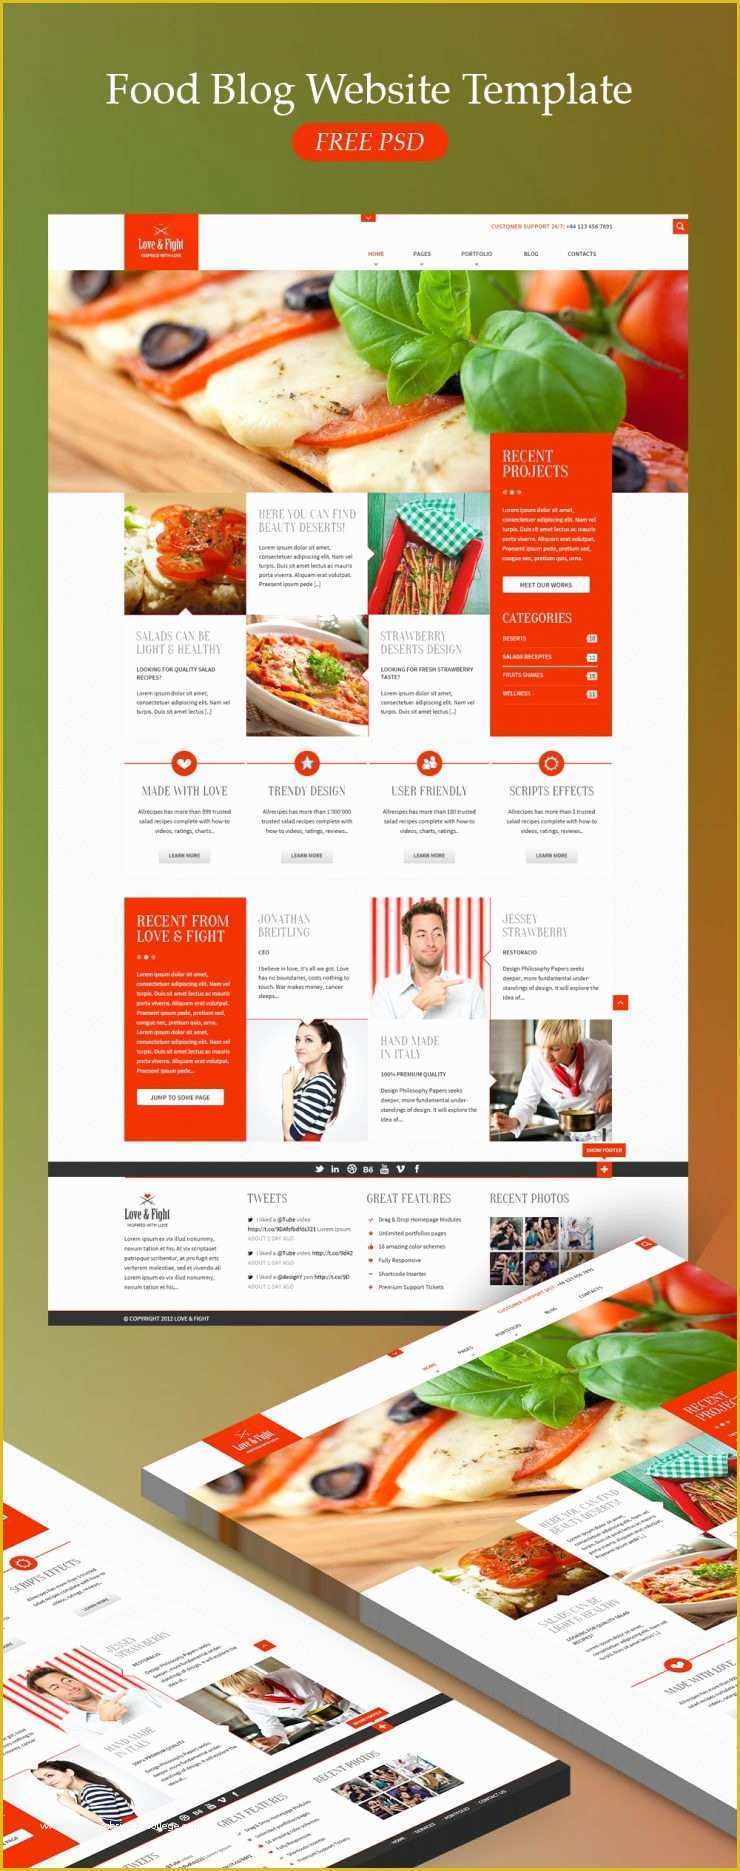 Free Cooking Website Templates Of Food Blog Website Template Free Psd Download Psd